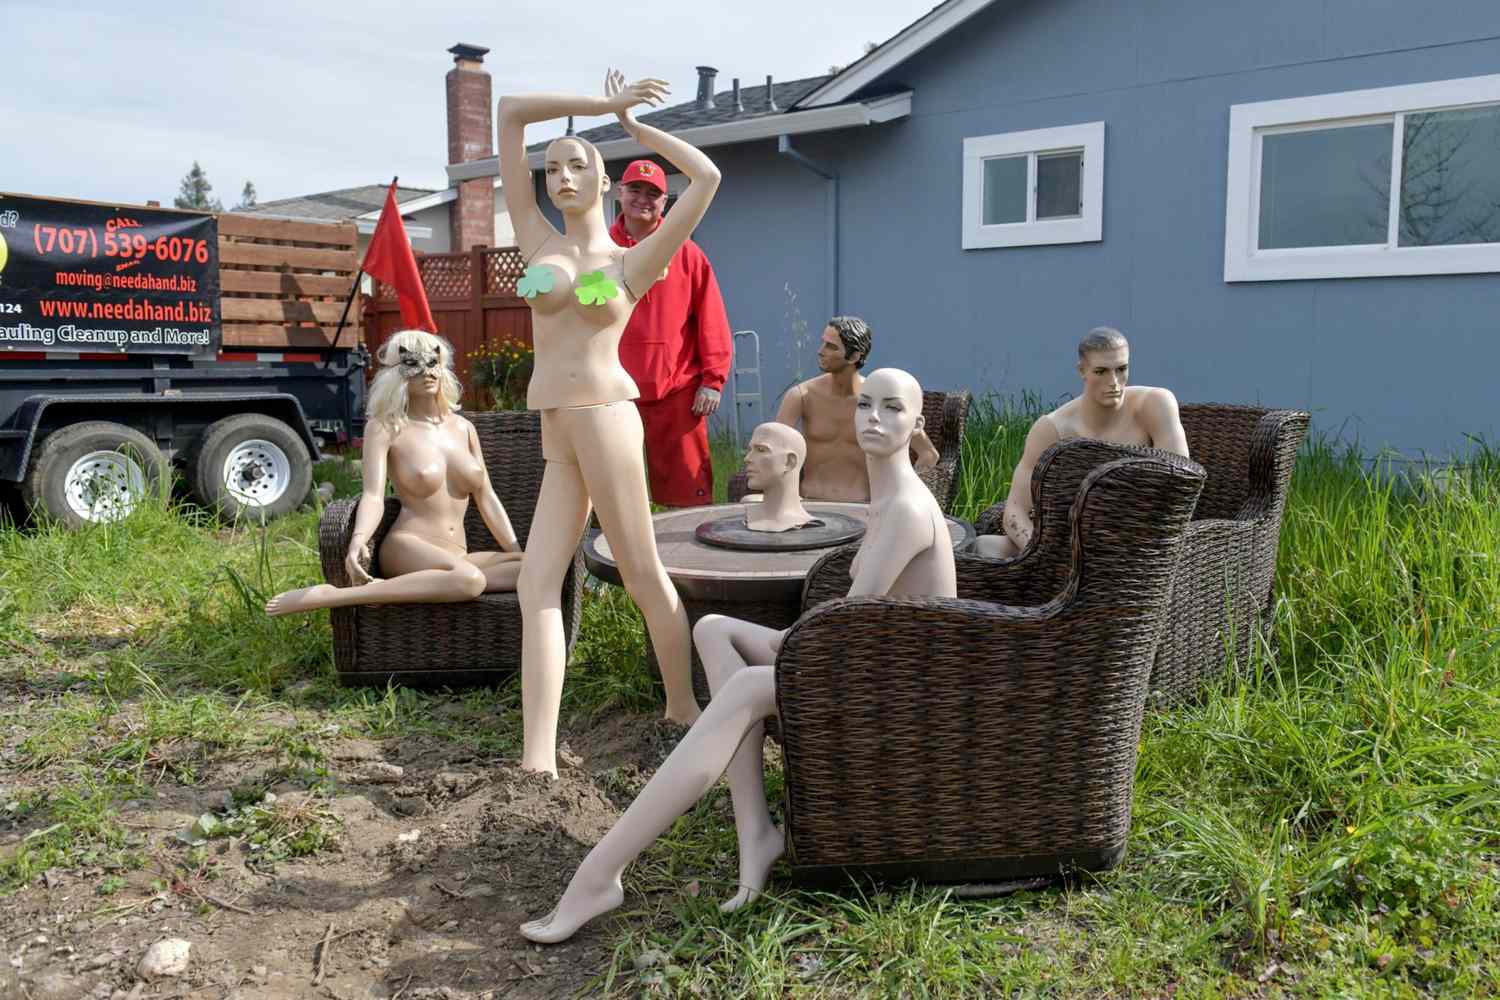 alison rush recommends neighbor naked in backyard pic